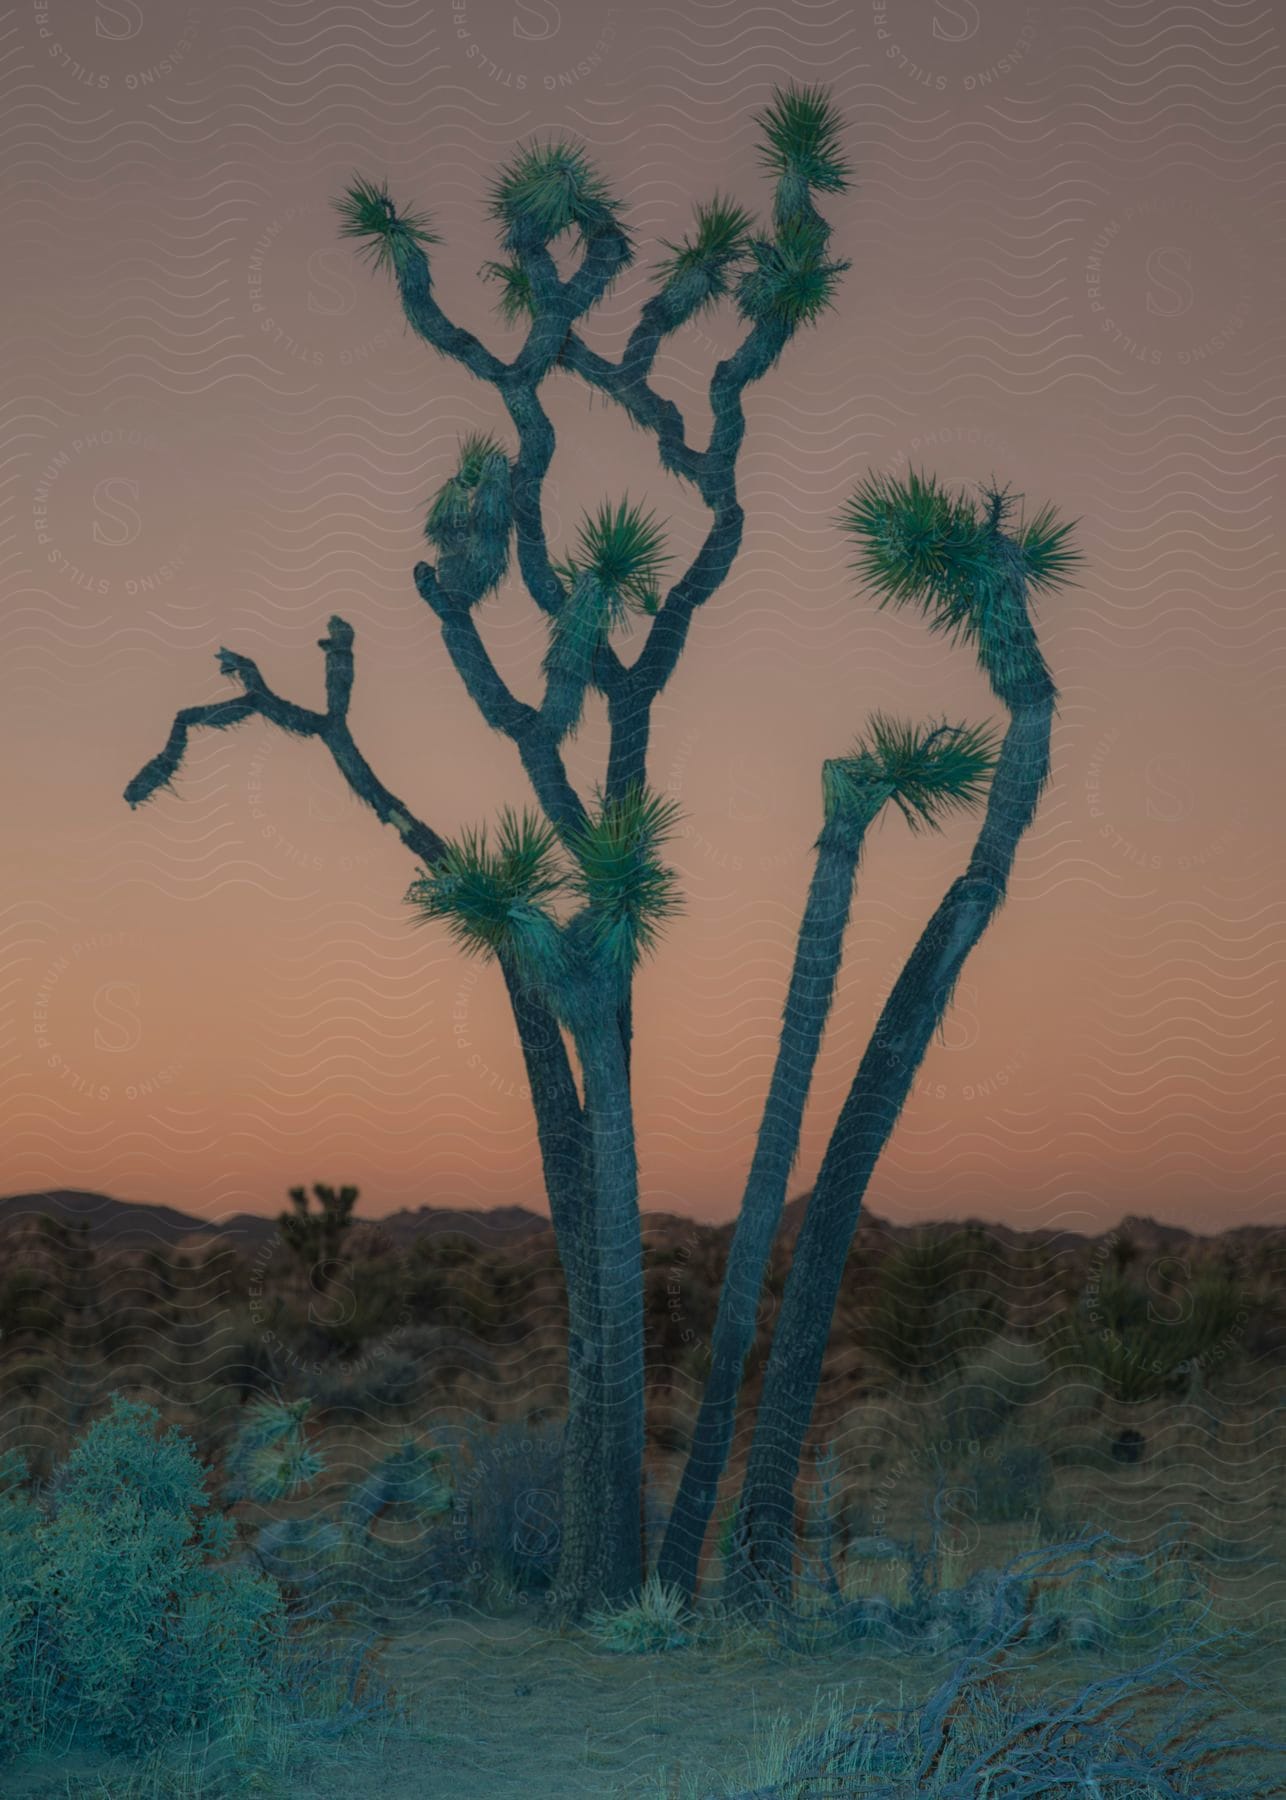 A joshua tree stands alone in the desert landscape